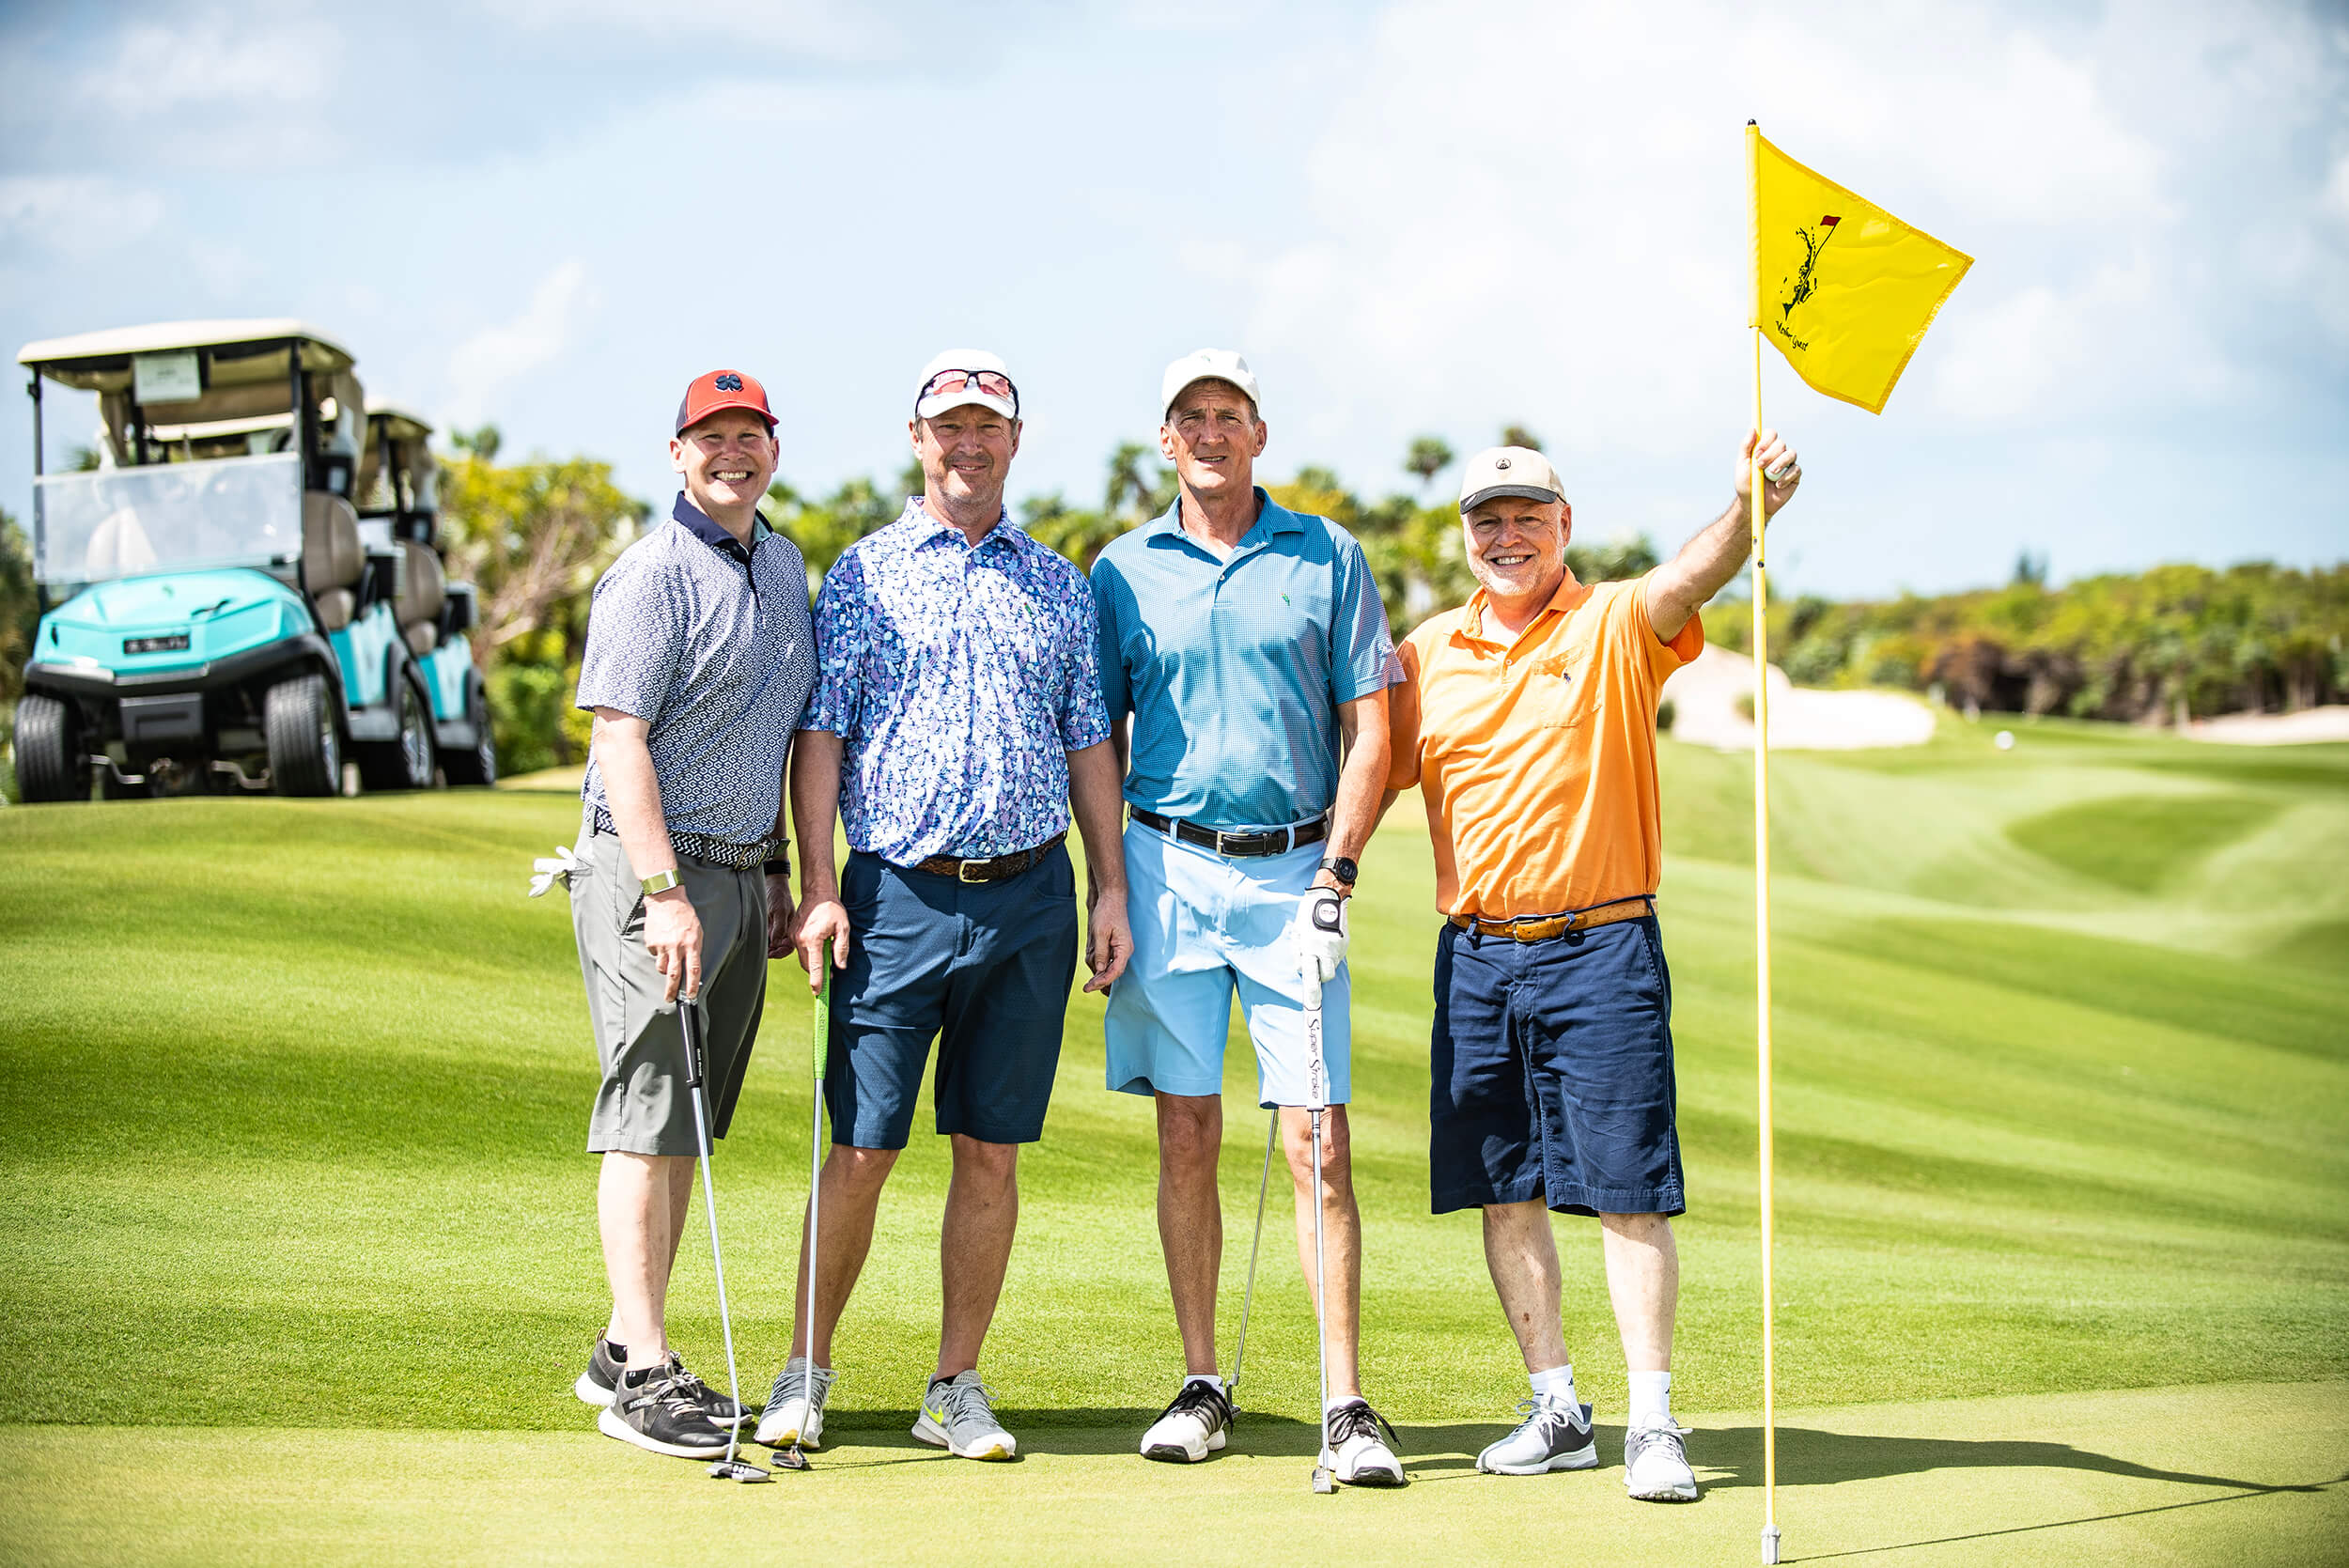 Golf Members posing for a picture at The Abaco Club, encapsulating the club lifestyle.